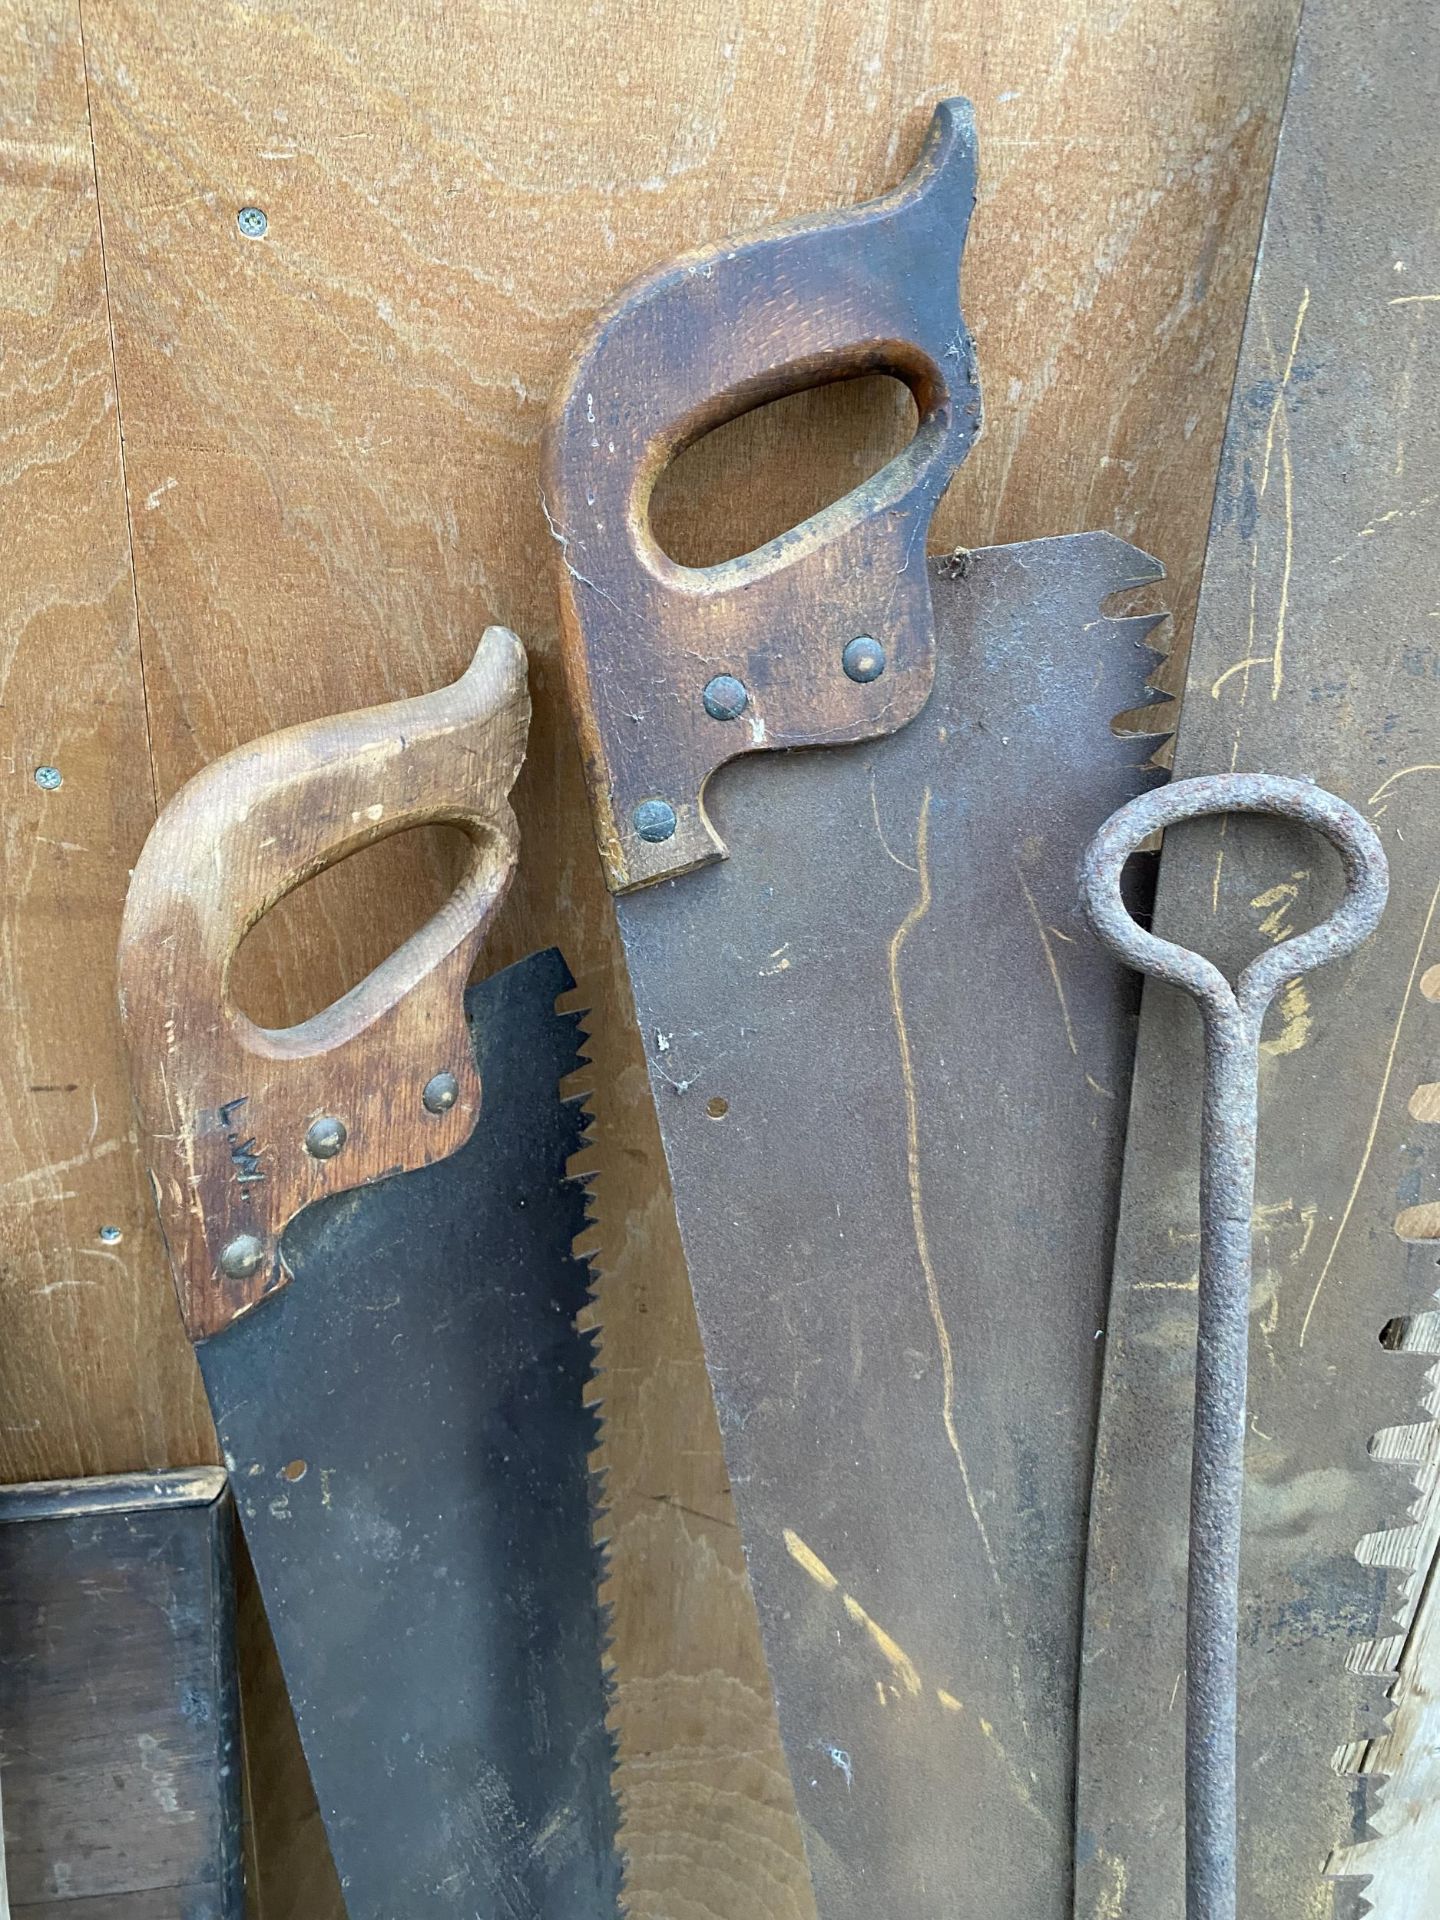 THREE VINTAGE CROSS CUT SAWS AND A VINTAGE CAST IRON DOUGH SHOVEL - Image 3 of 4